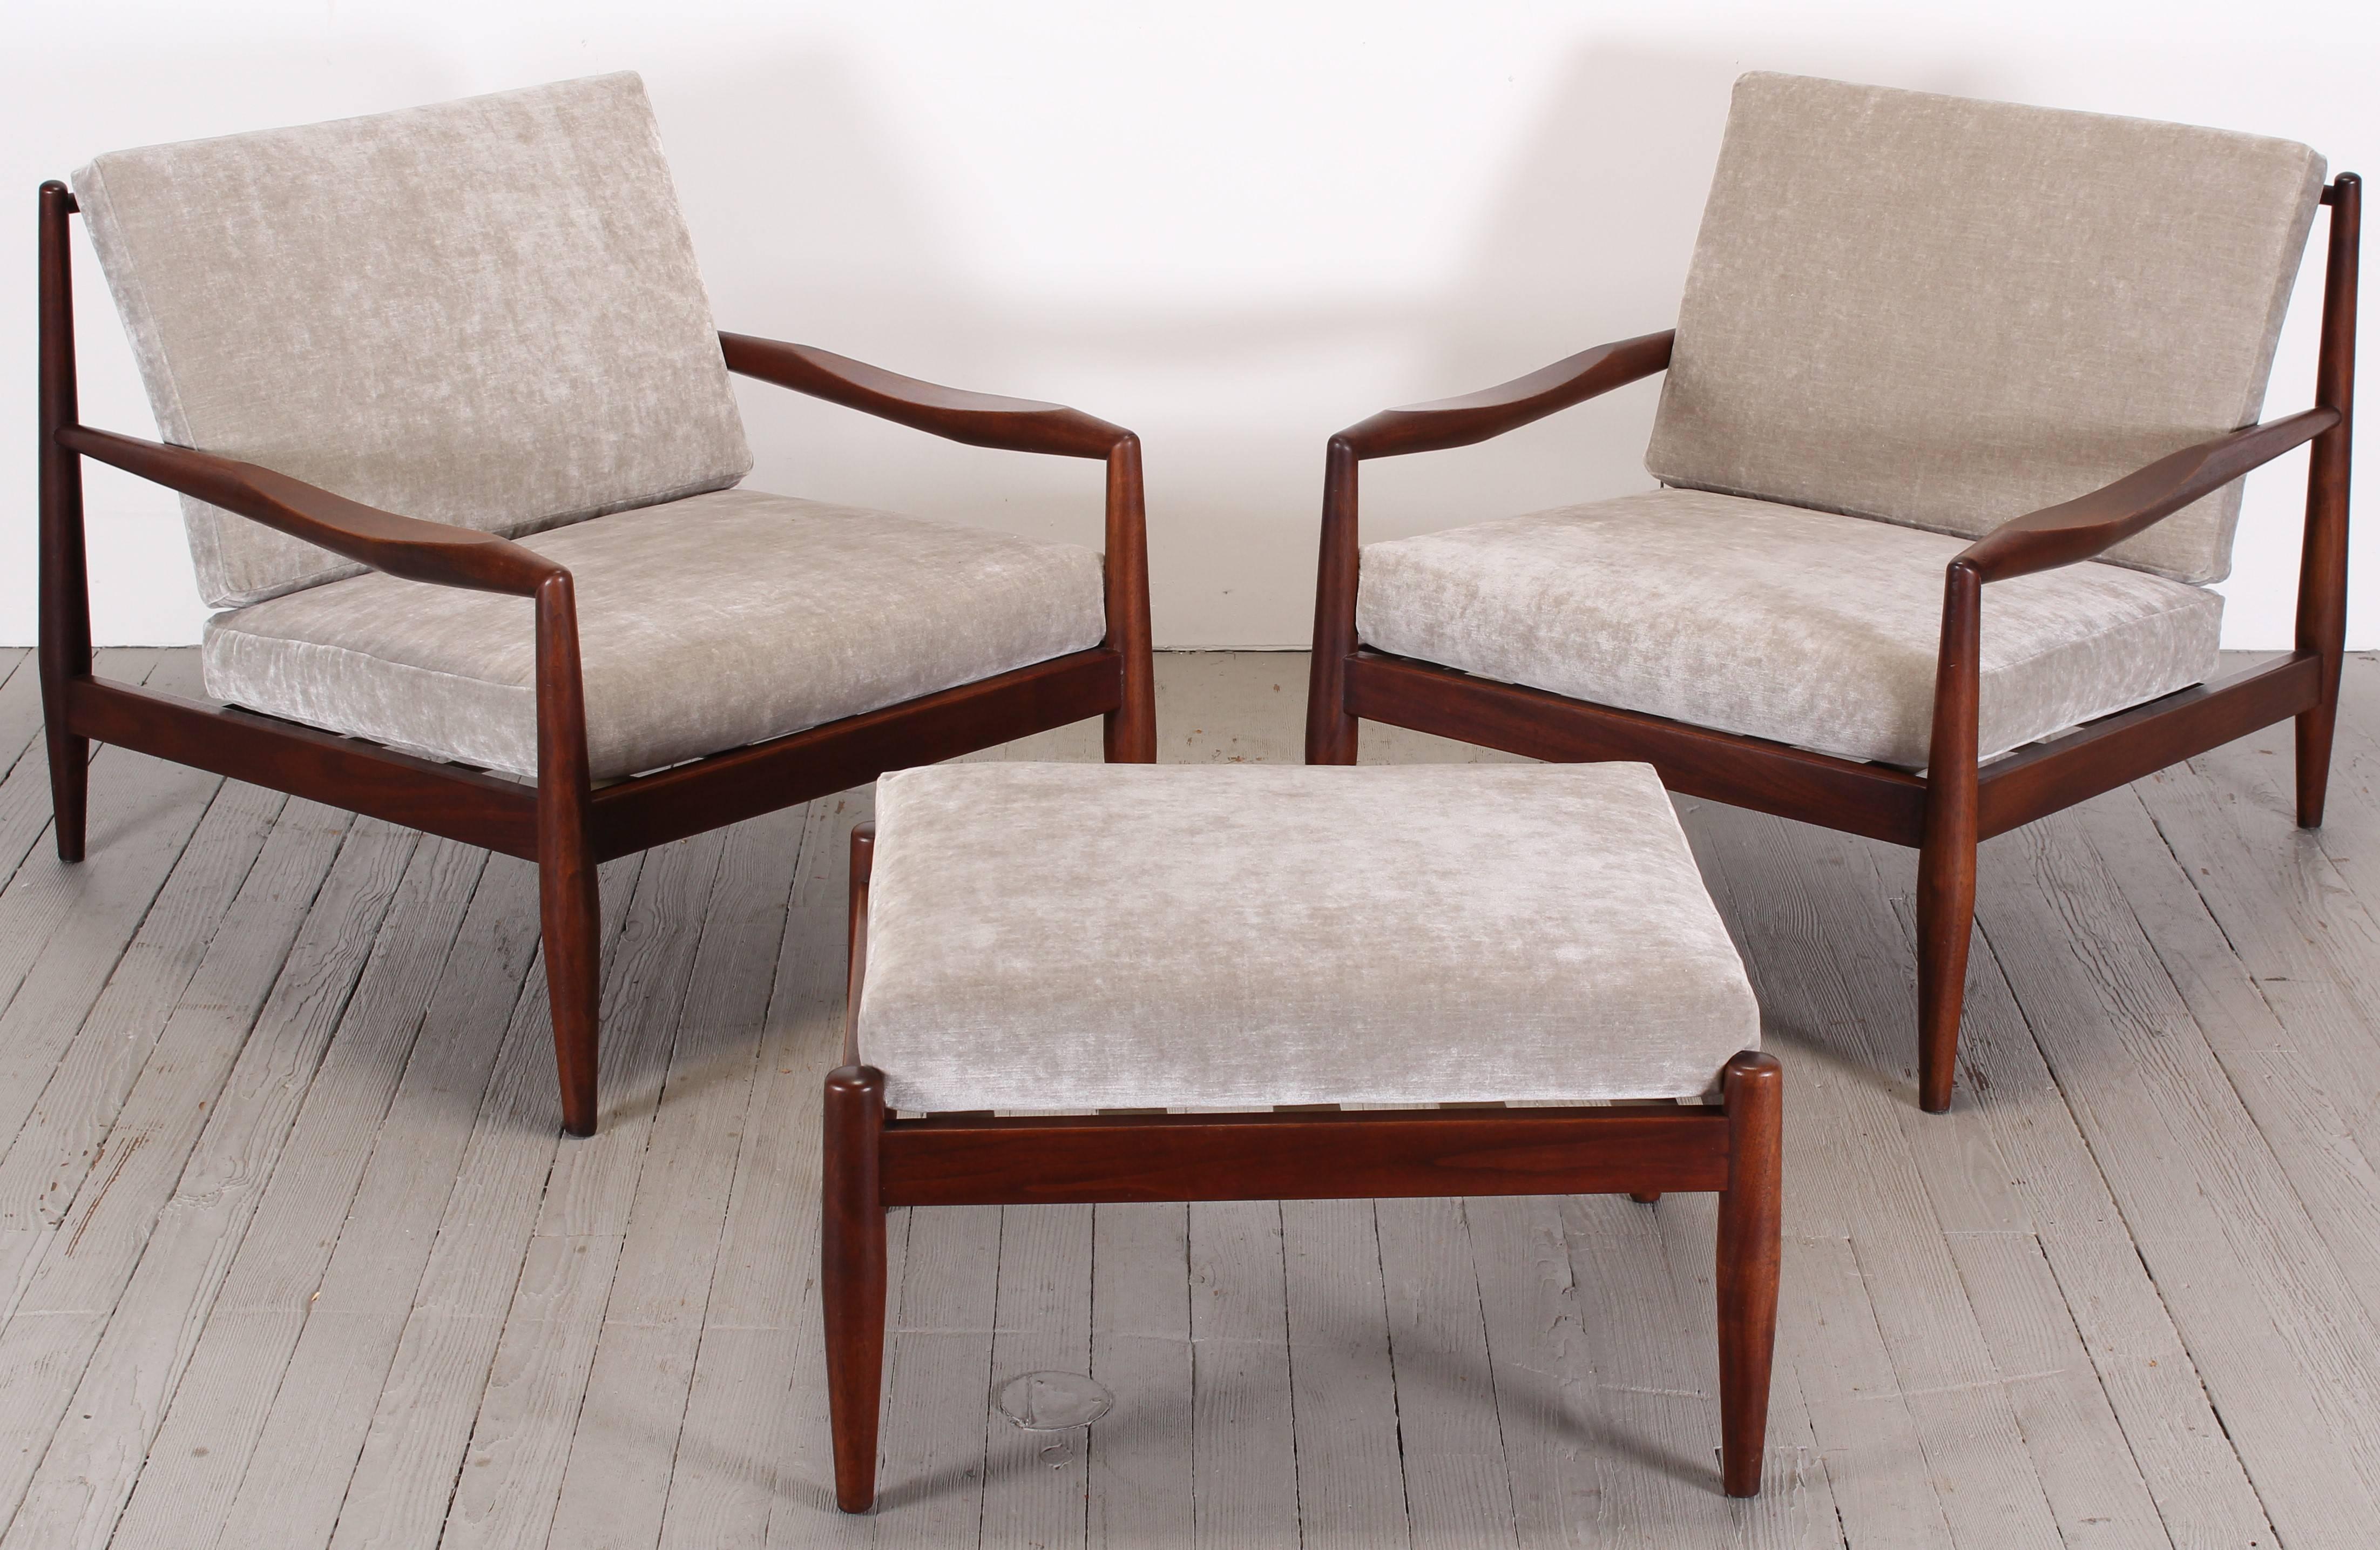 A pair of walnut Craft Associates lounge chairs and a single ottoman, designed by Adrian Pearsall. Newly upholstered, new foam, new Perilli straps, in a grey velvet by Pindler and Pindler.